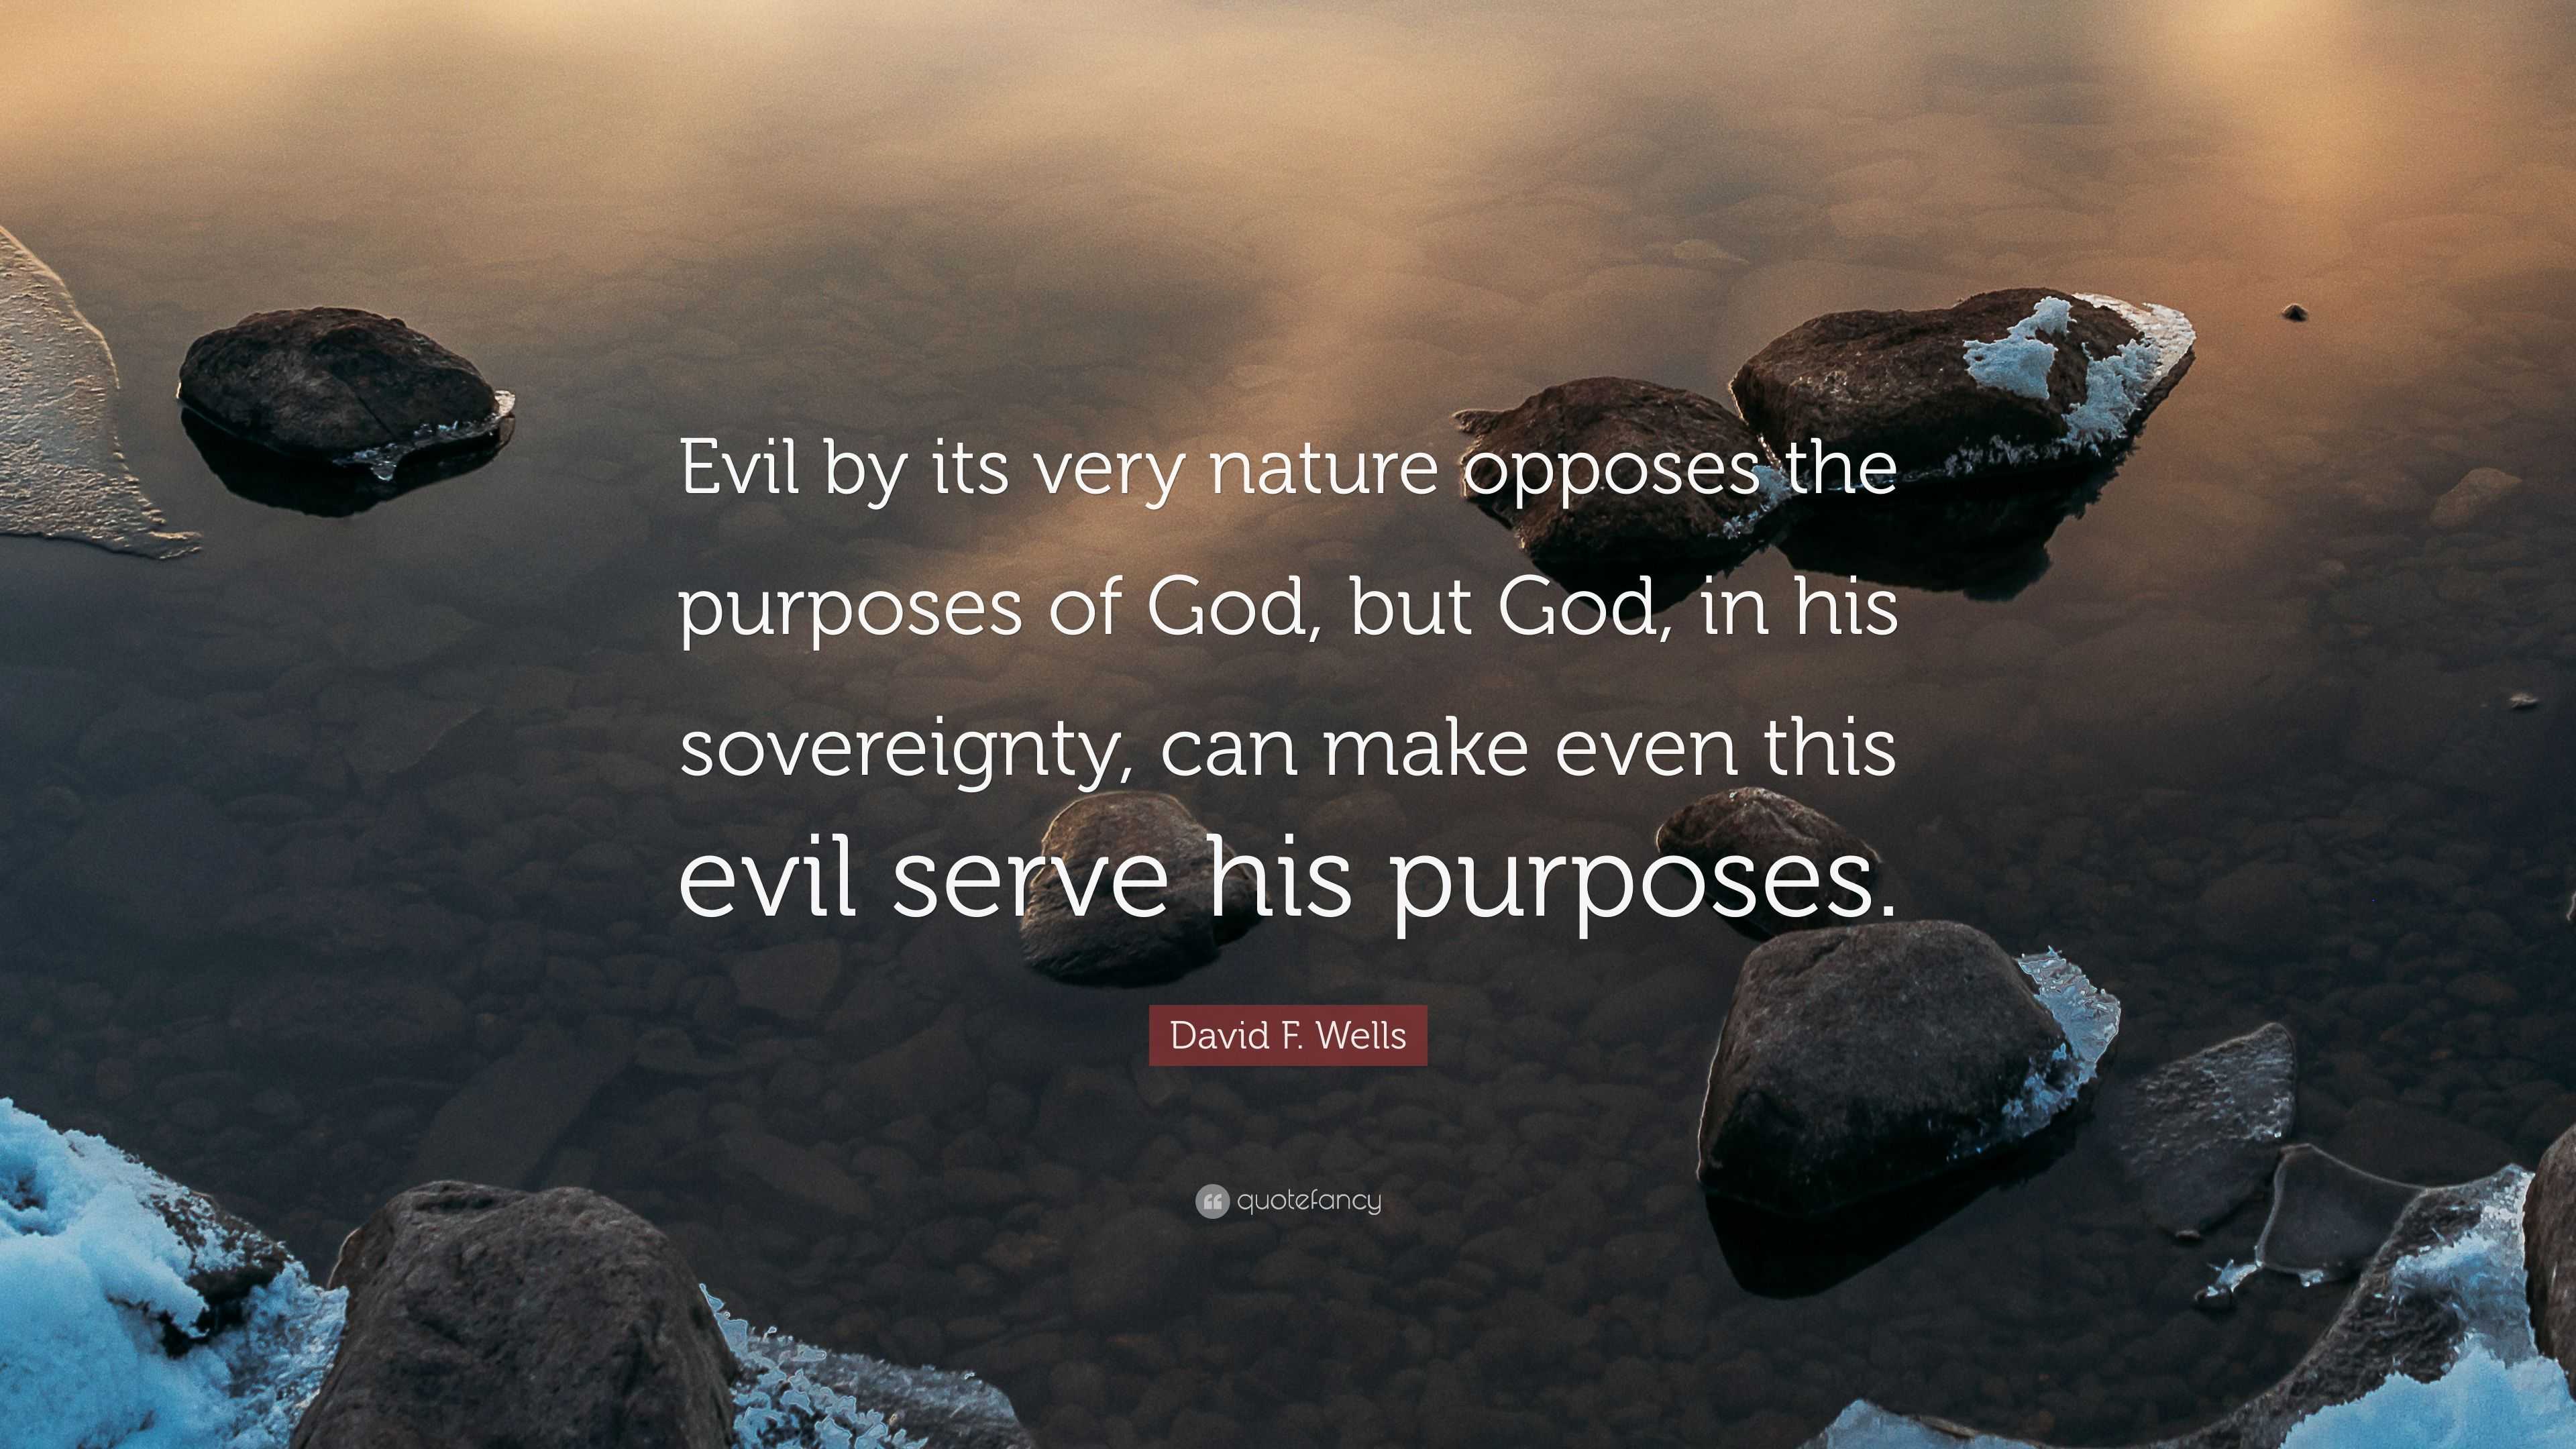 David F. Wells Quote: “Evil by its very nature opposes the purposes of God,  but God, in his sovereignty, can make even this evil serve his purp...”